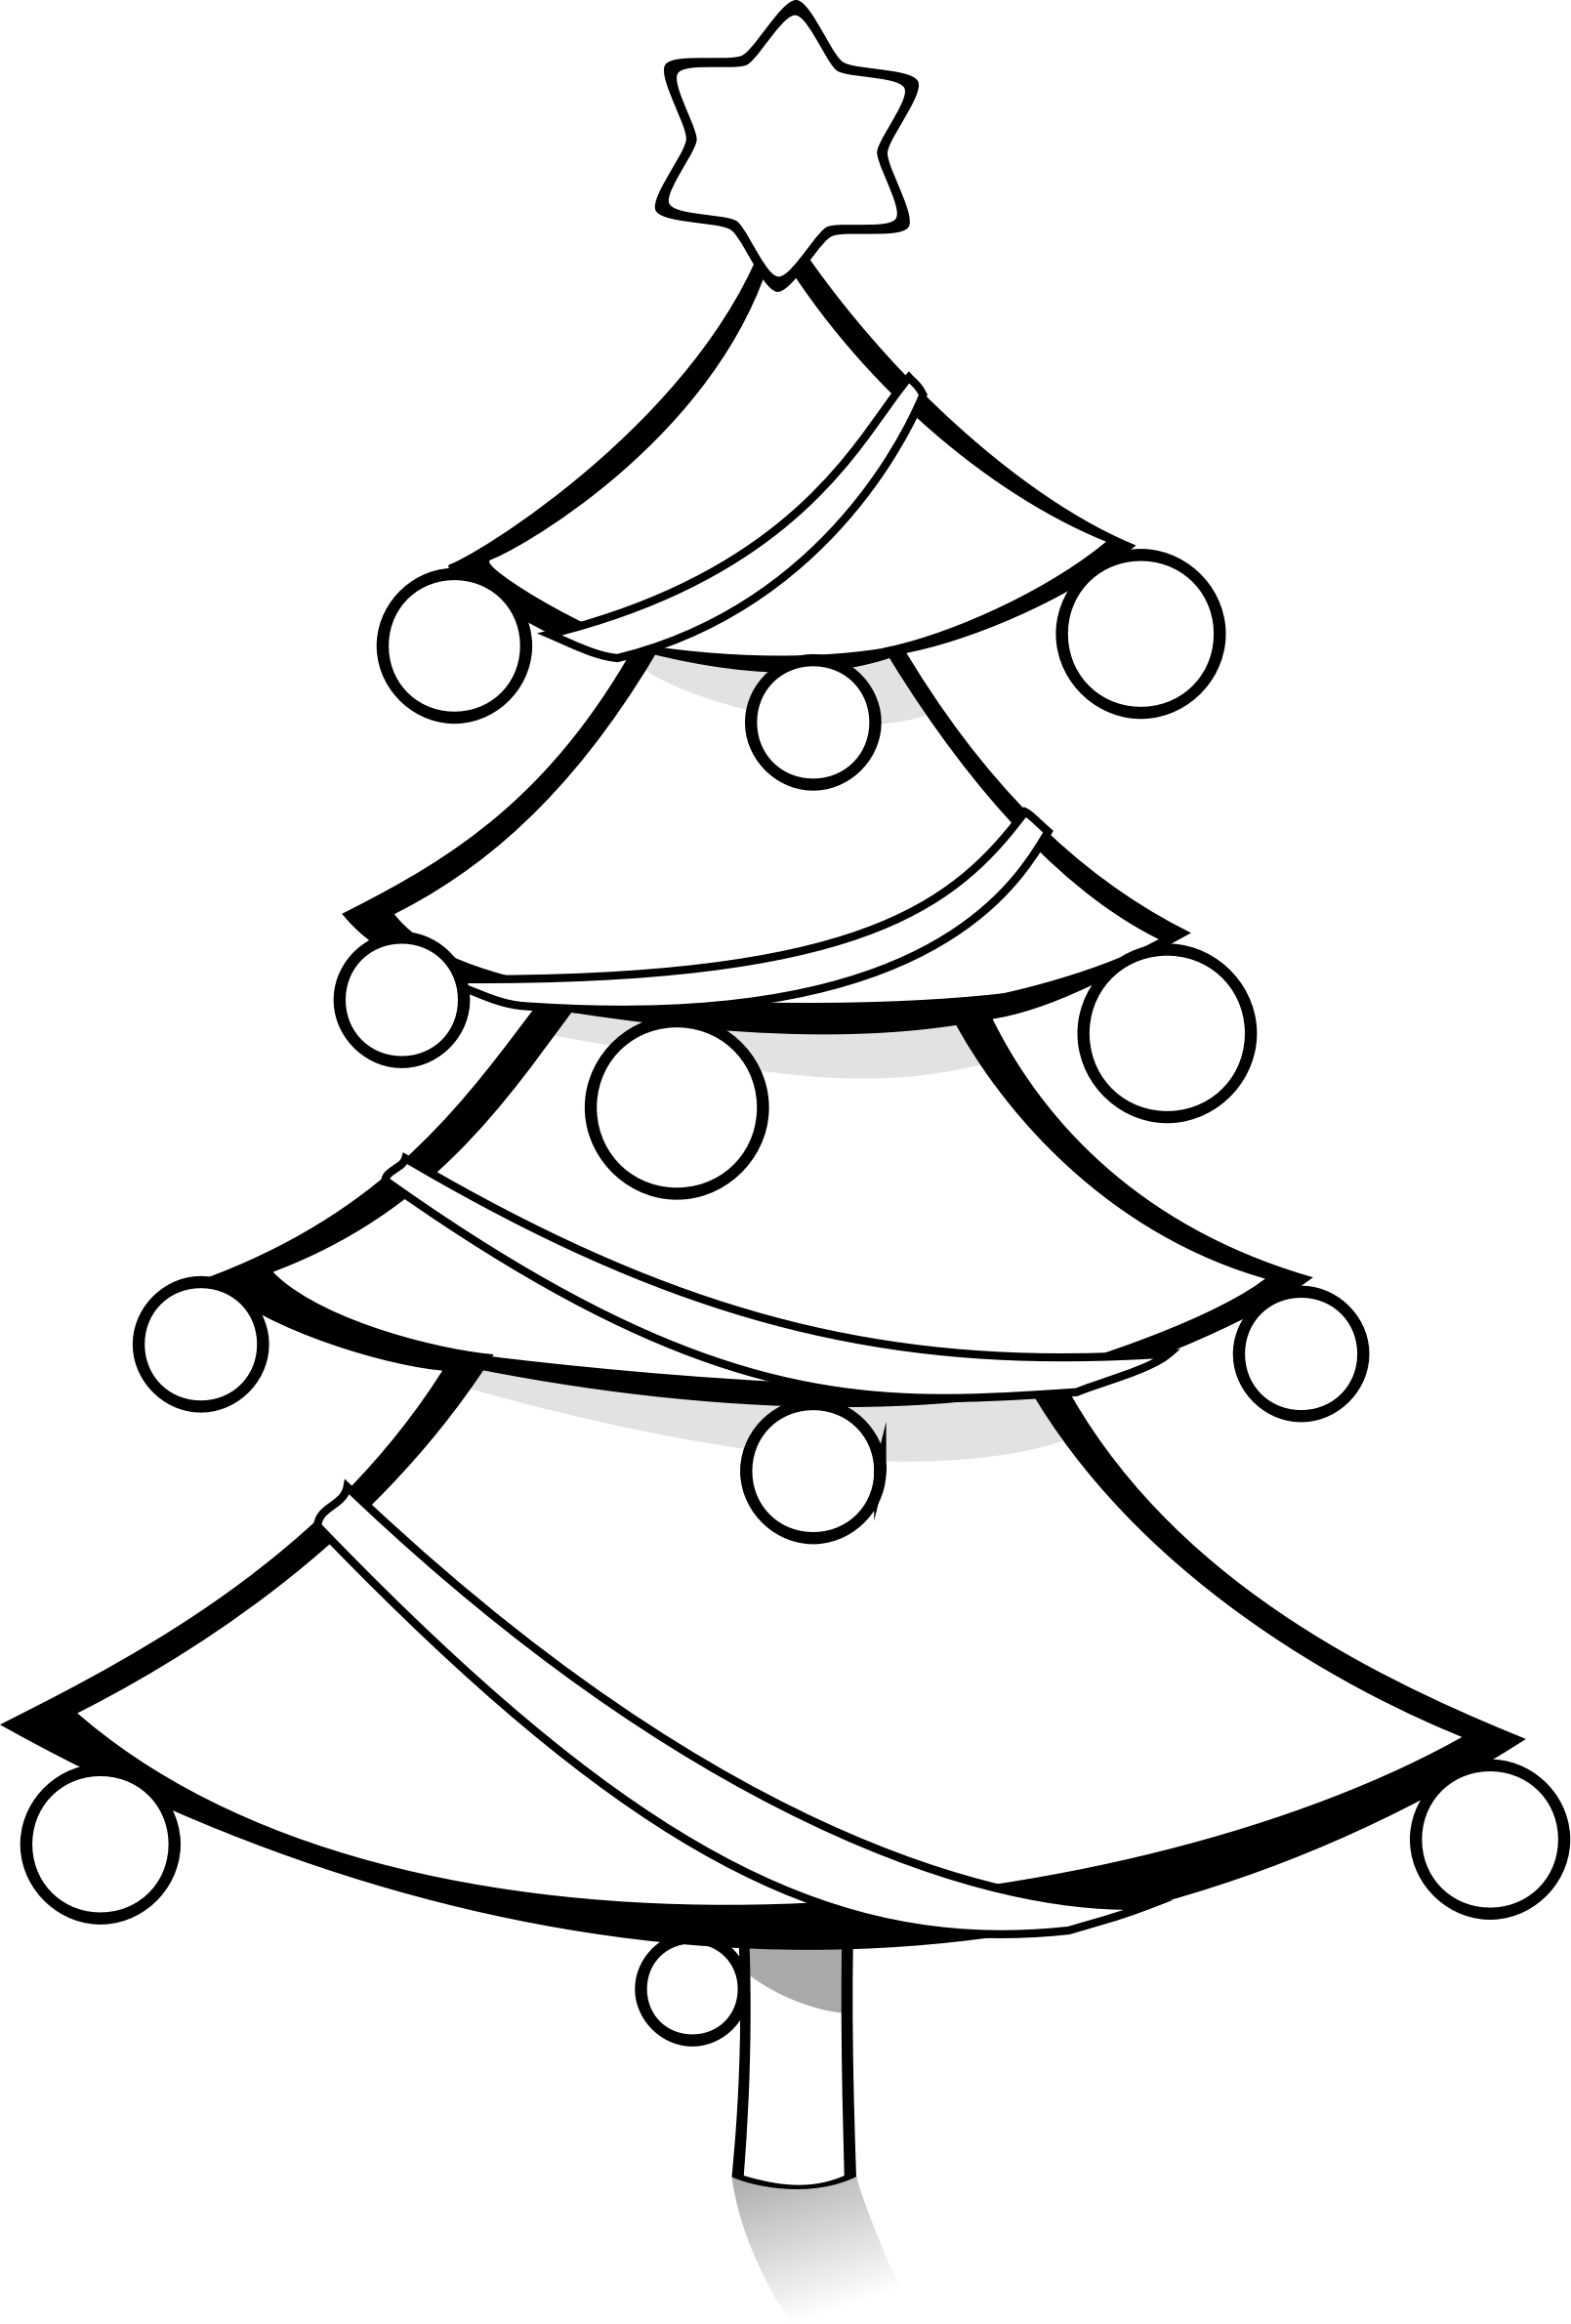 Free Christmas Tree Clip Art Black And White, Download Free Christmas